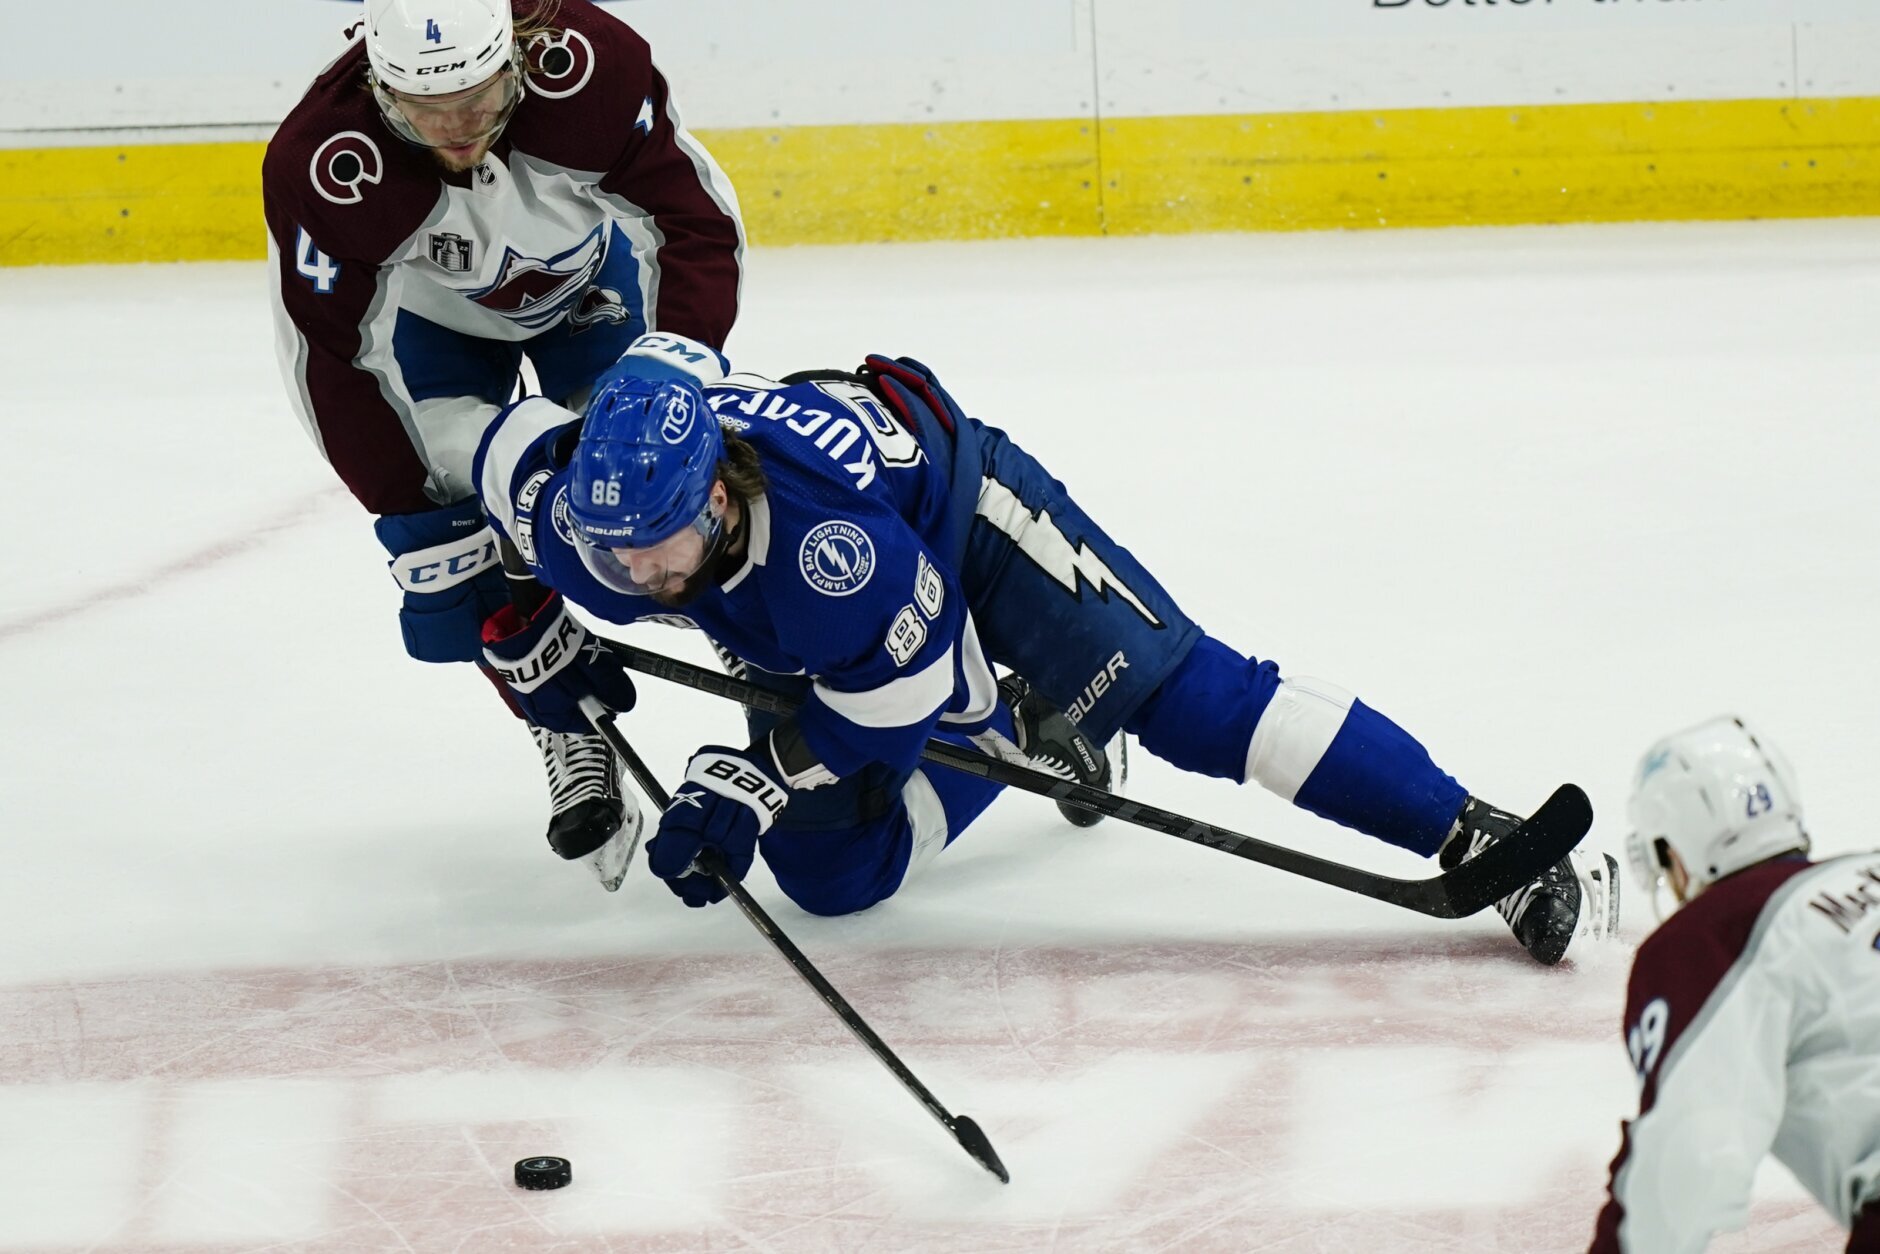 https://wtop.com/wp-content/uploads/2022/06/Stanley_Cup_Avalanche_Lightning_Hockey_75916-1880x1254.jpg